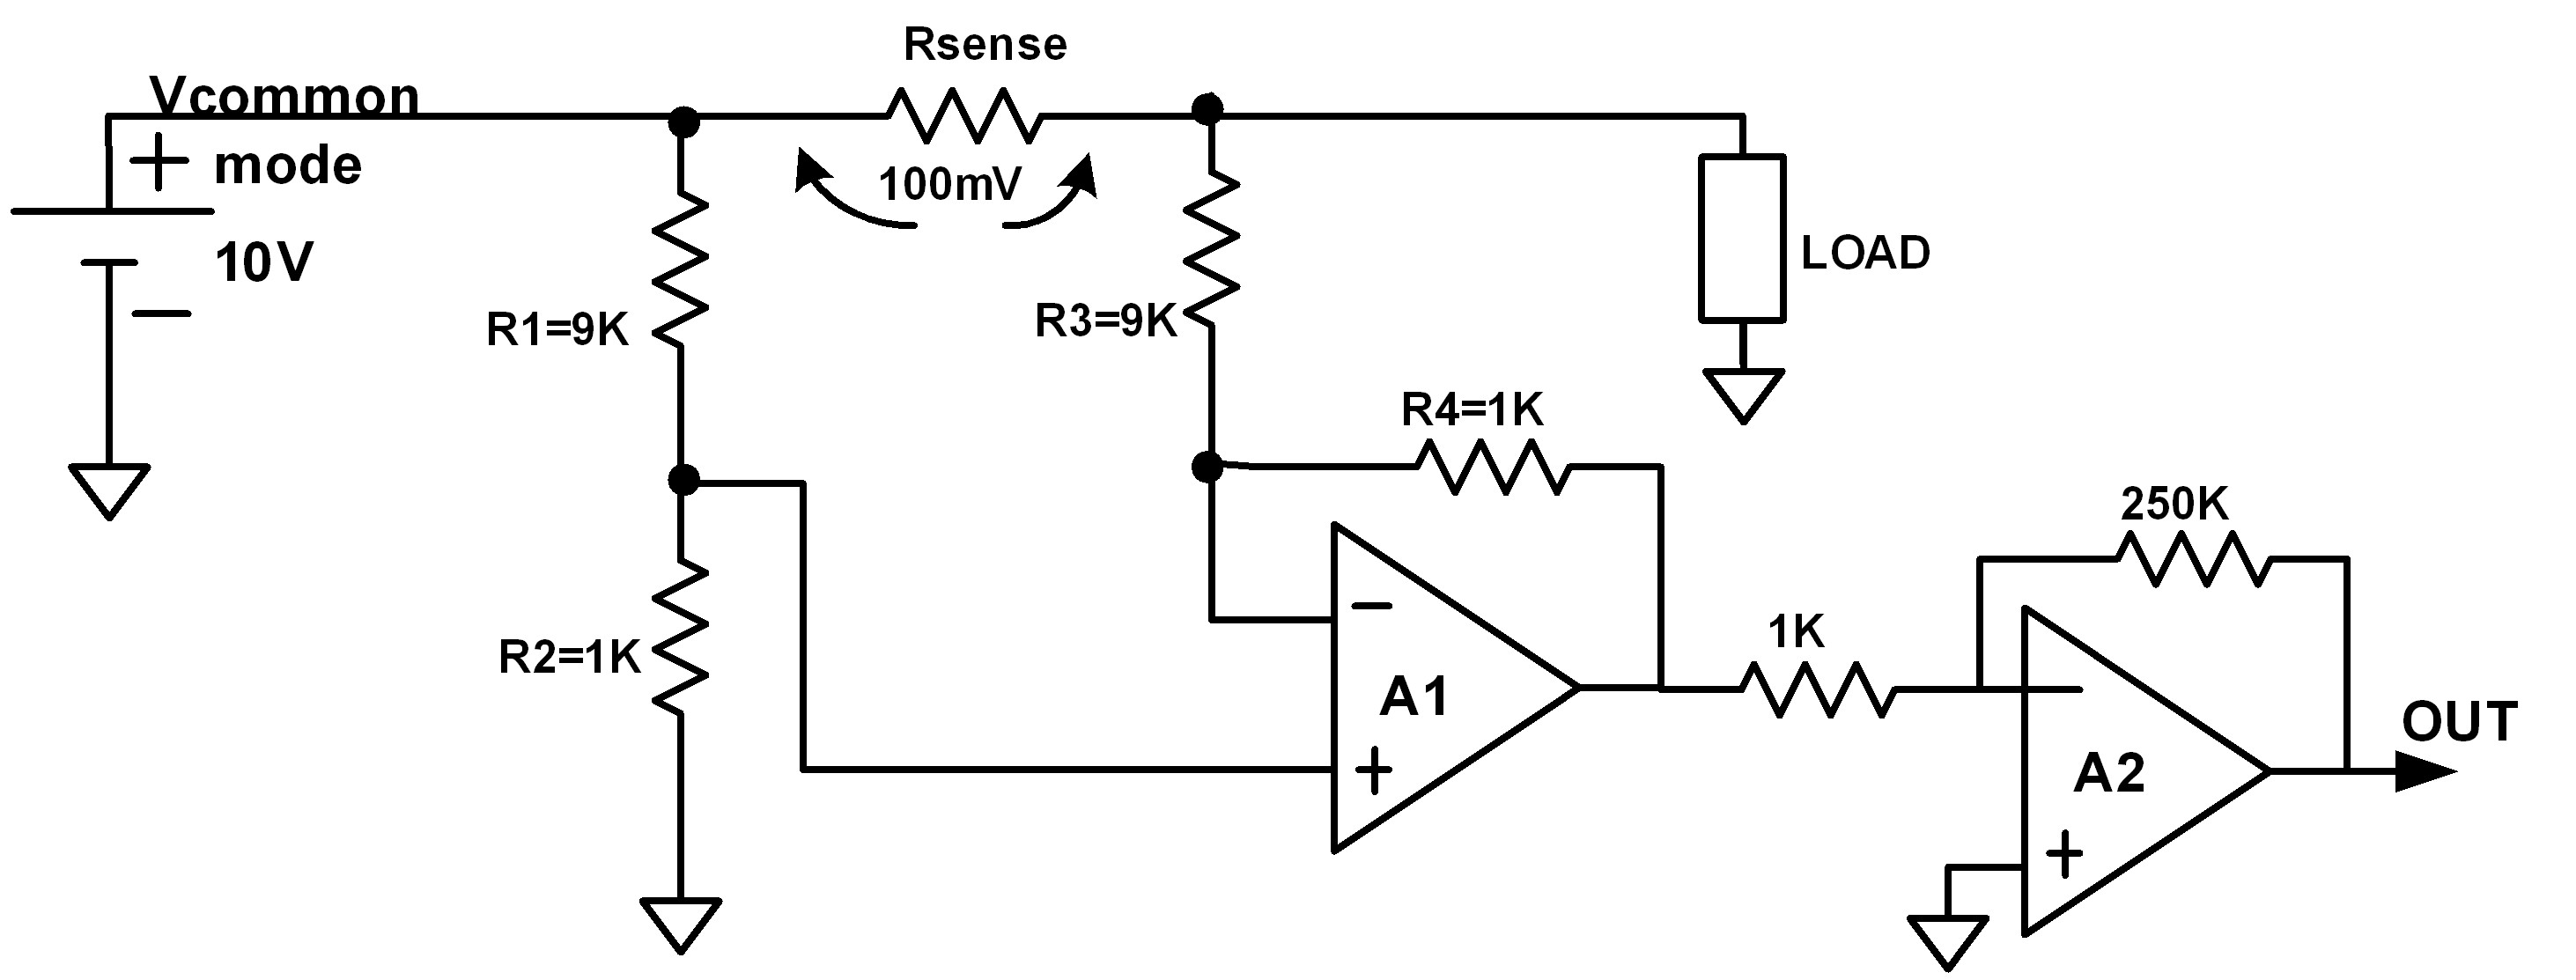 Arduino Need Help With Circuit Design For Current Measurement Enter Image Description Here full Diagram